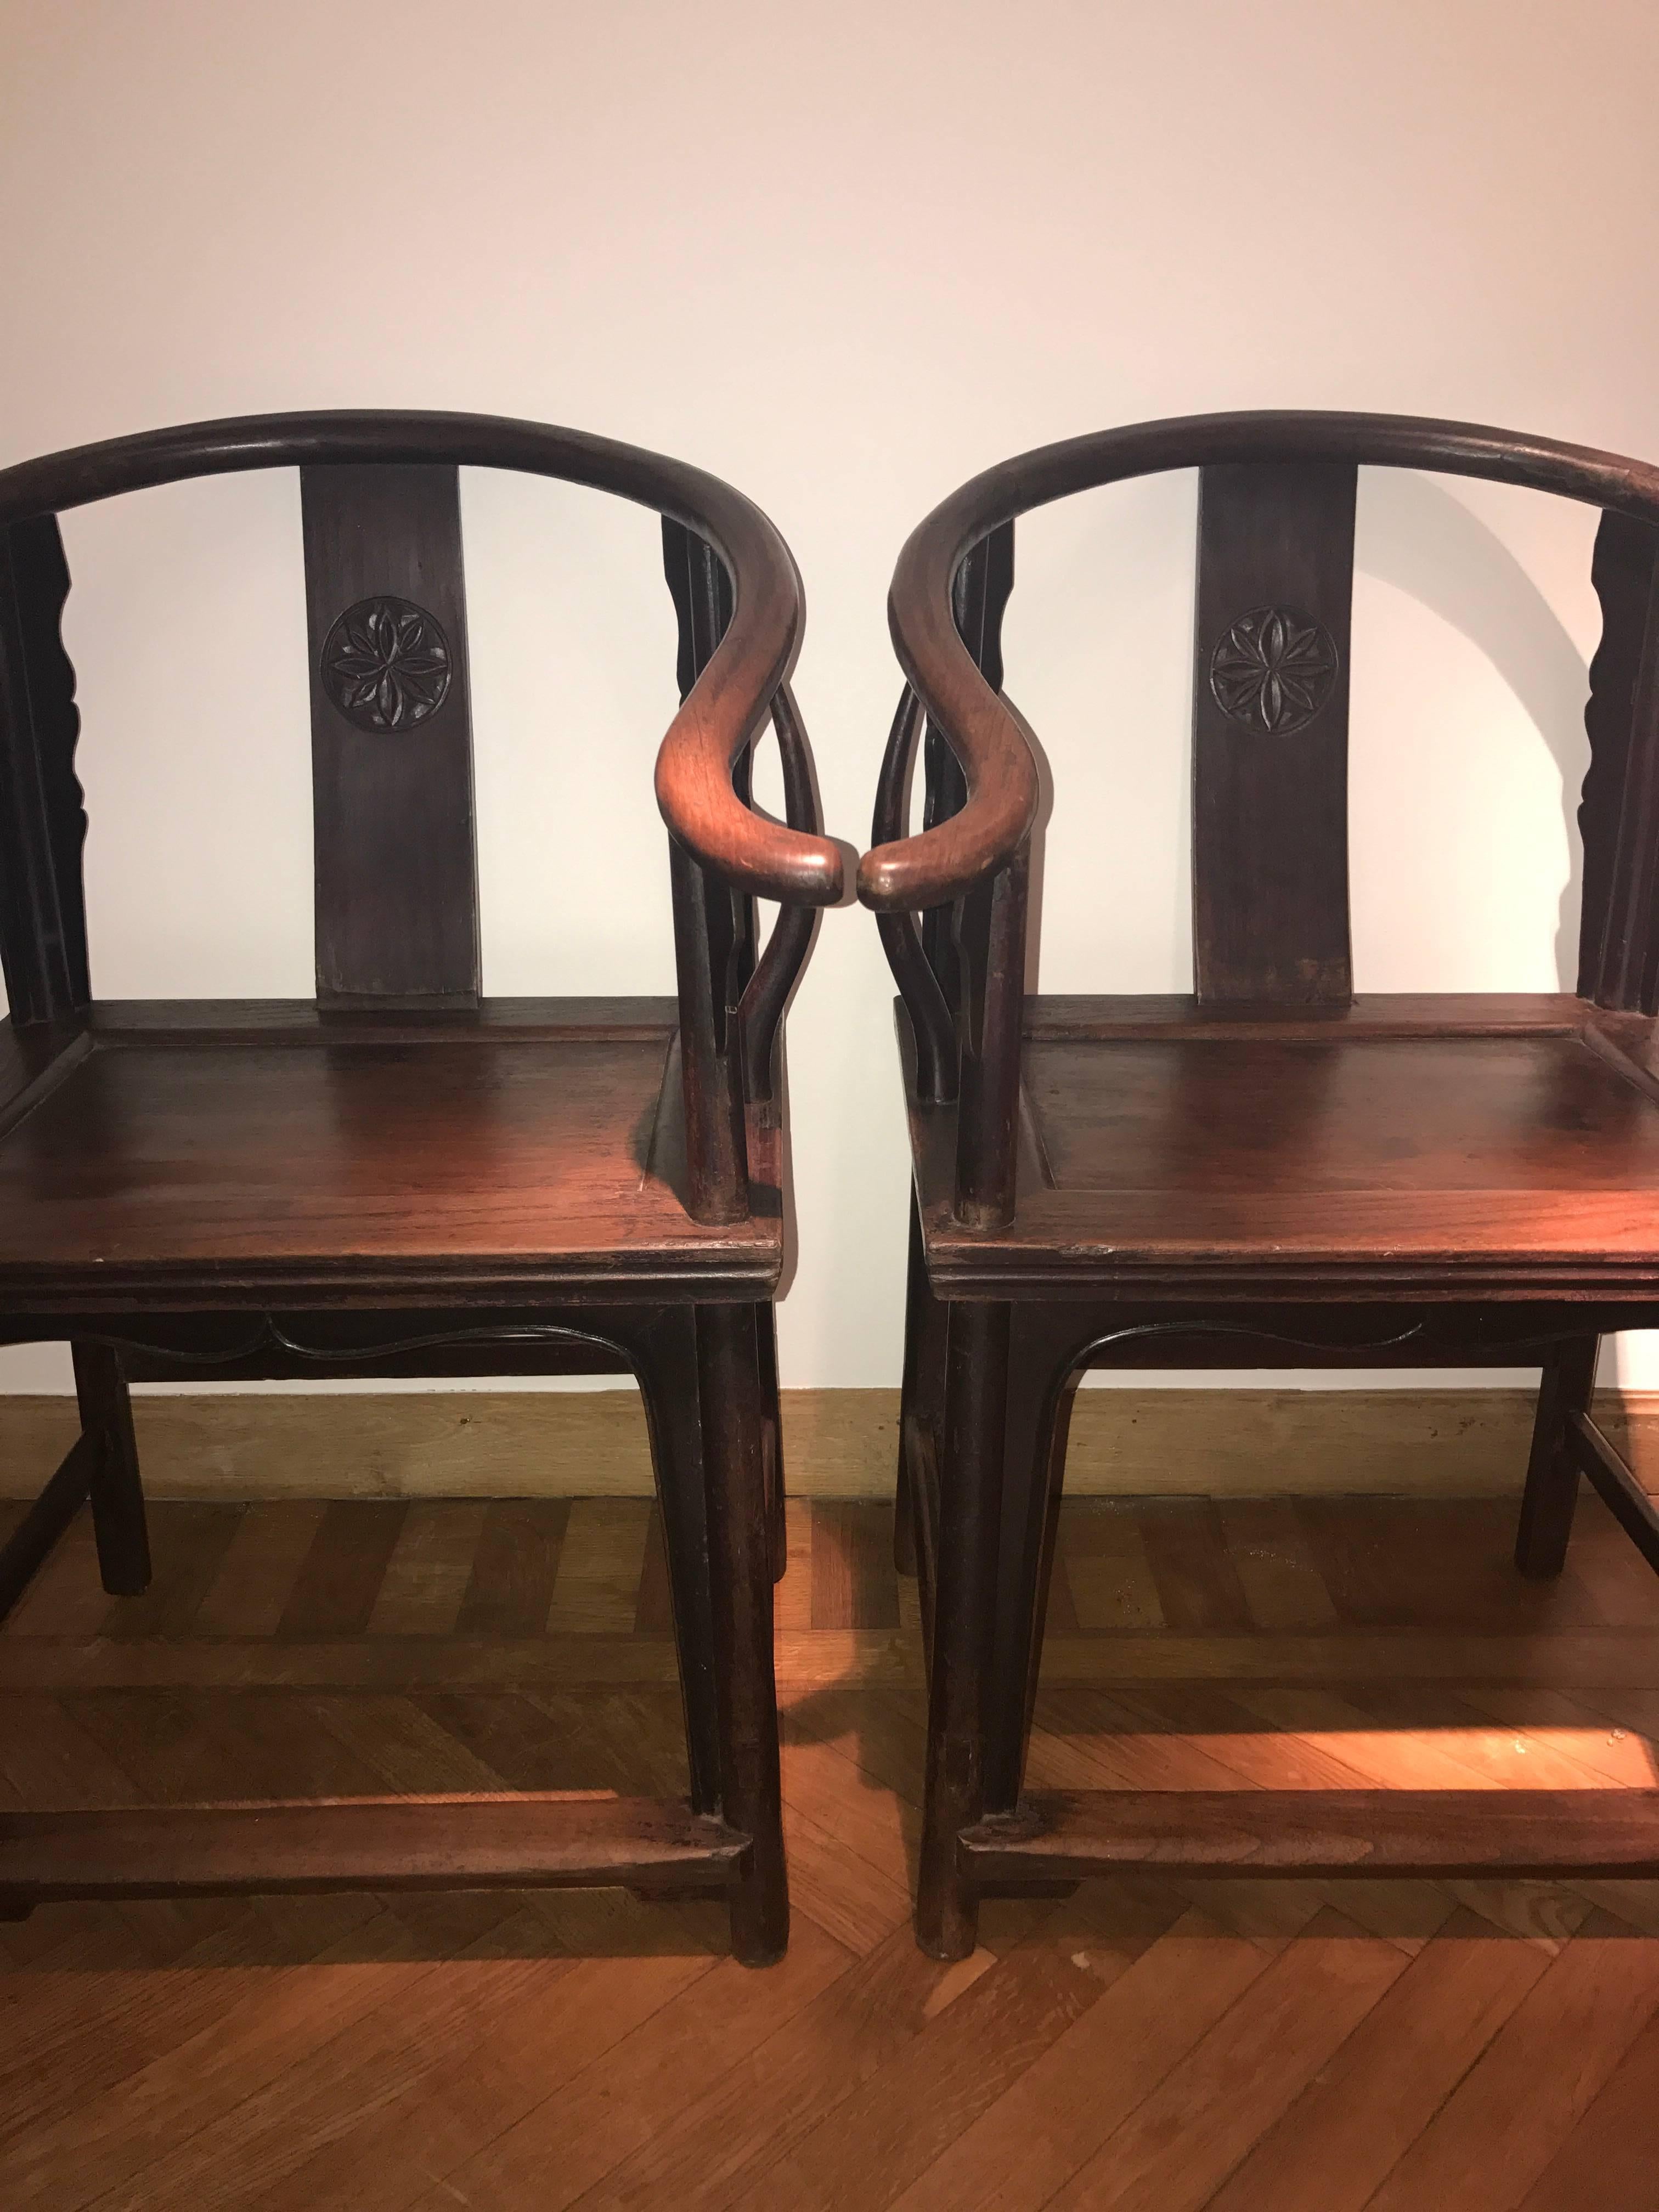 Pair of Antique Chinese Horseshoe chairs in Elm Wood,
excellent old patina, great and warm shine of the wood,
very decorative pair of chairs, can be placed in various rooms in you house,
high quality pair of antique chairs